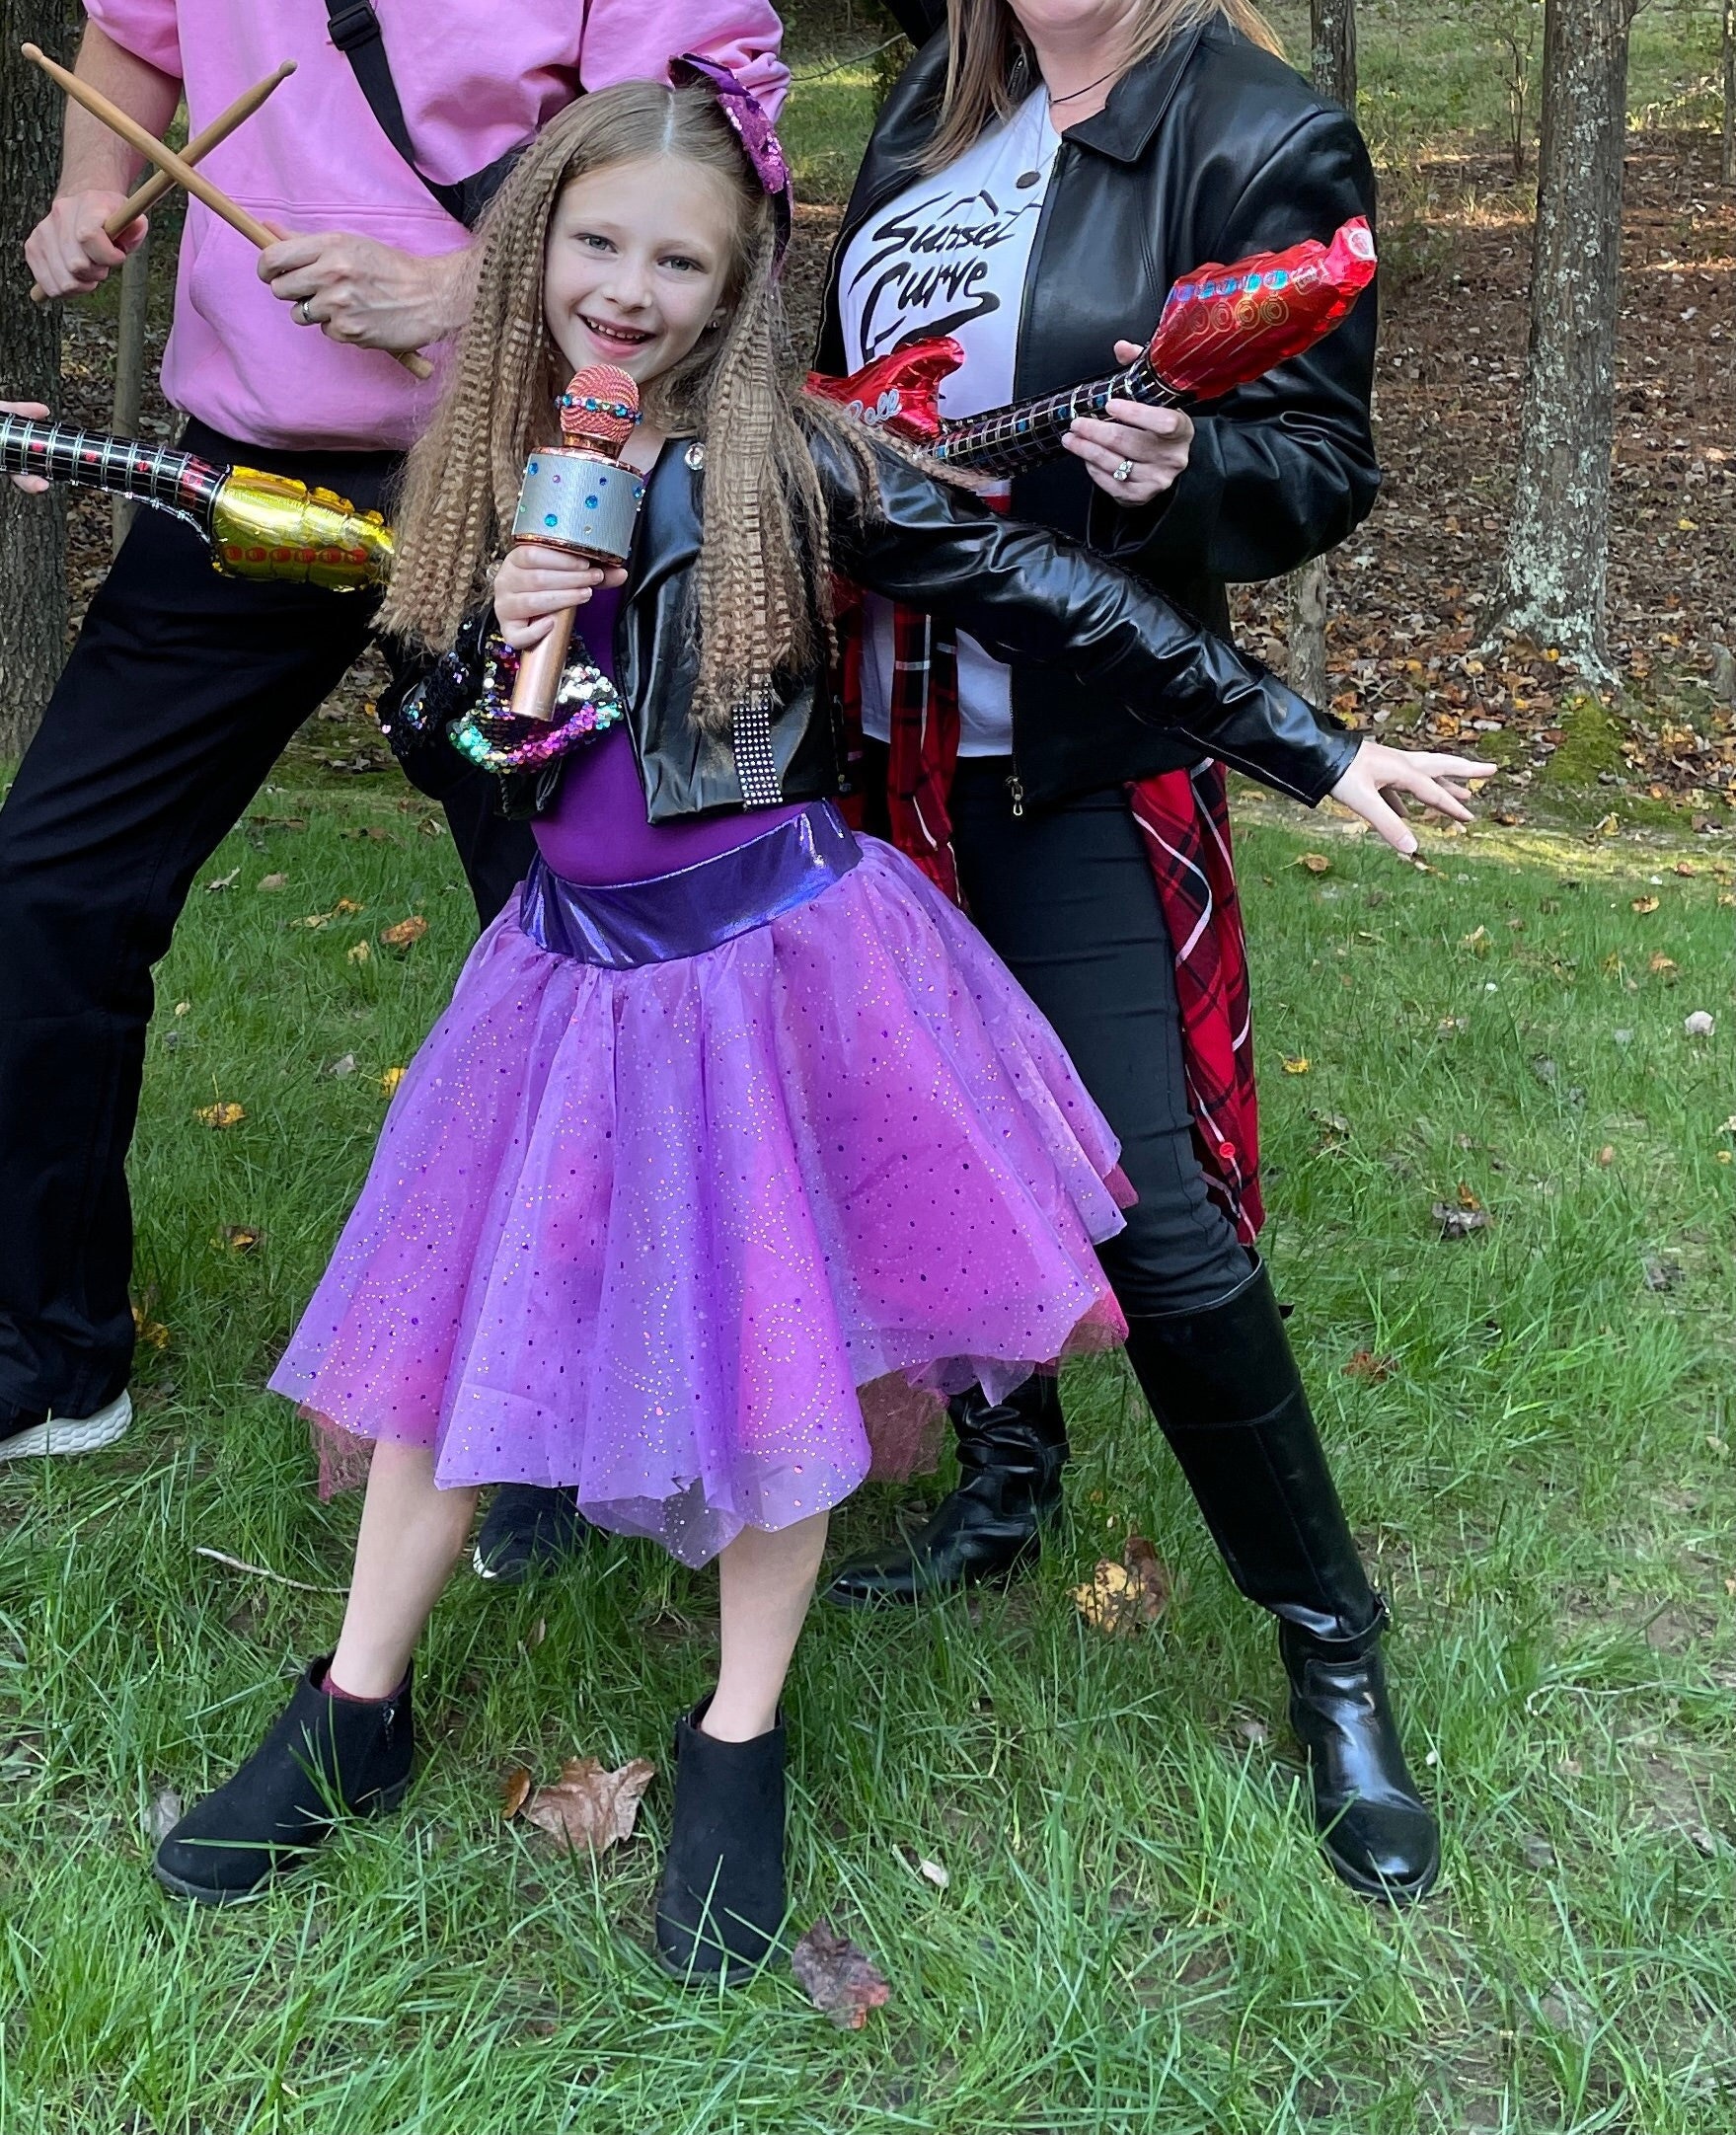 Pin by co on Kinder  Kids rockstar costume, Rocker costume, Girls rock  star costume